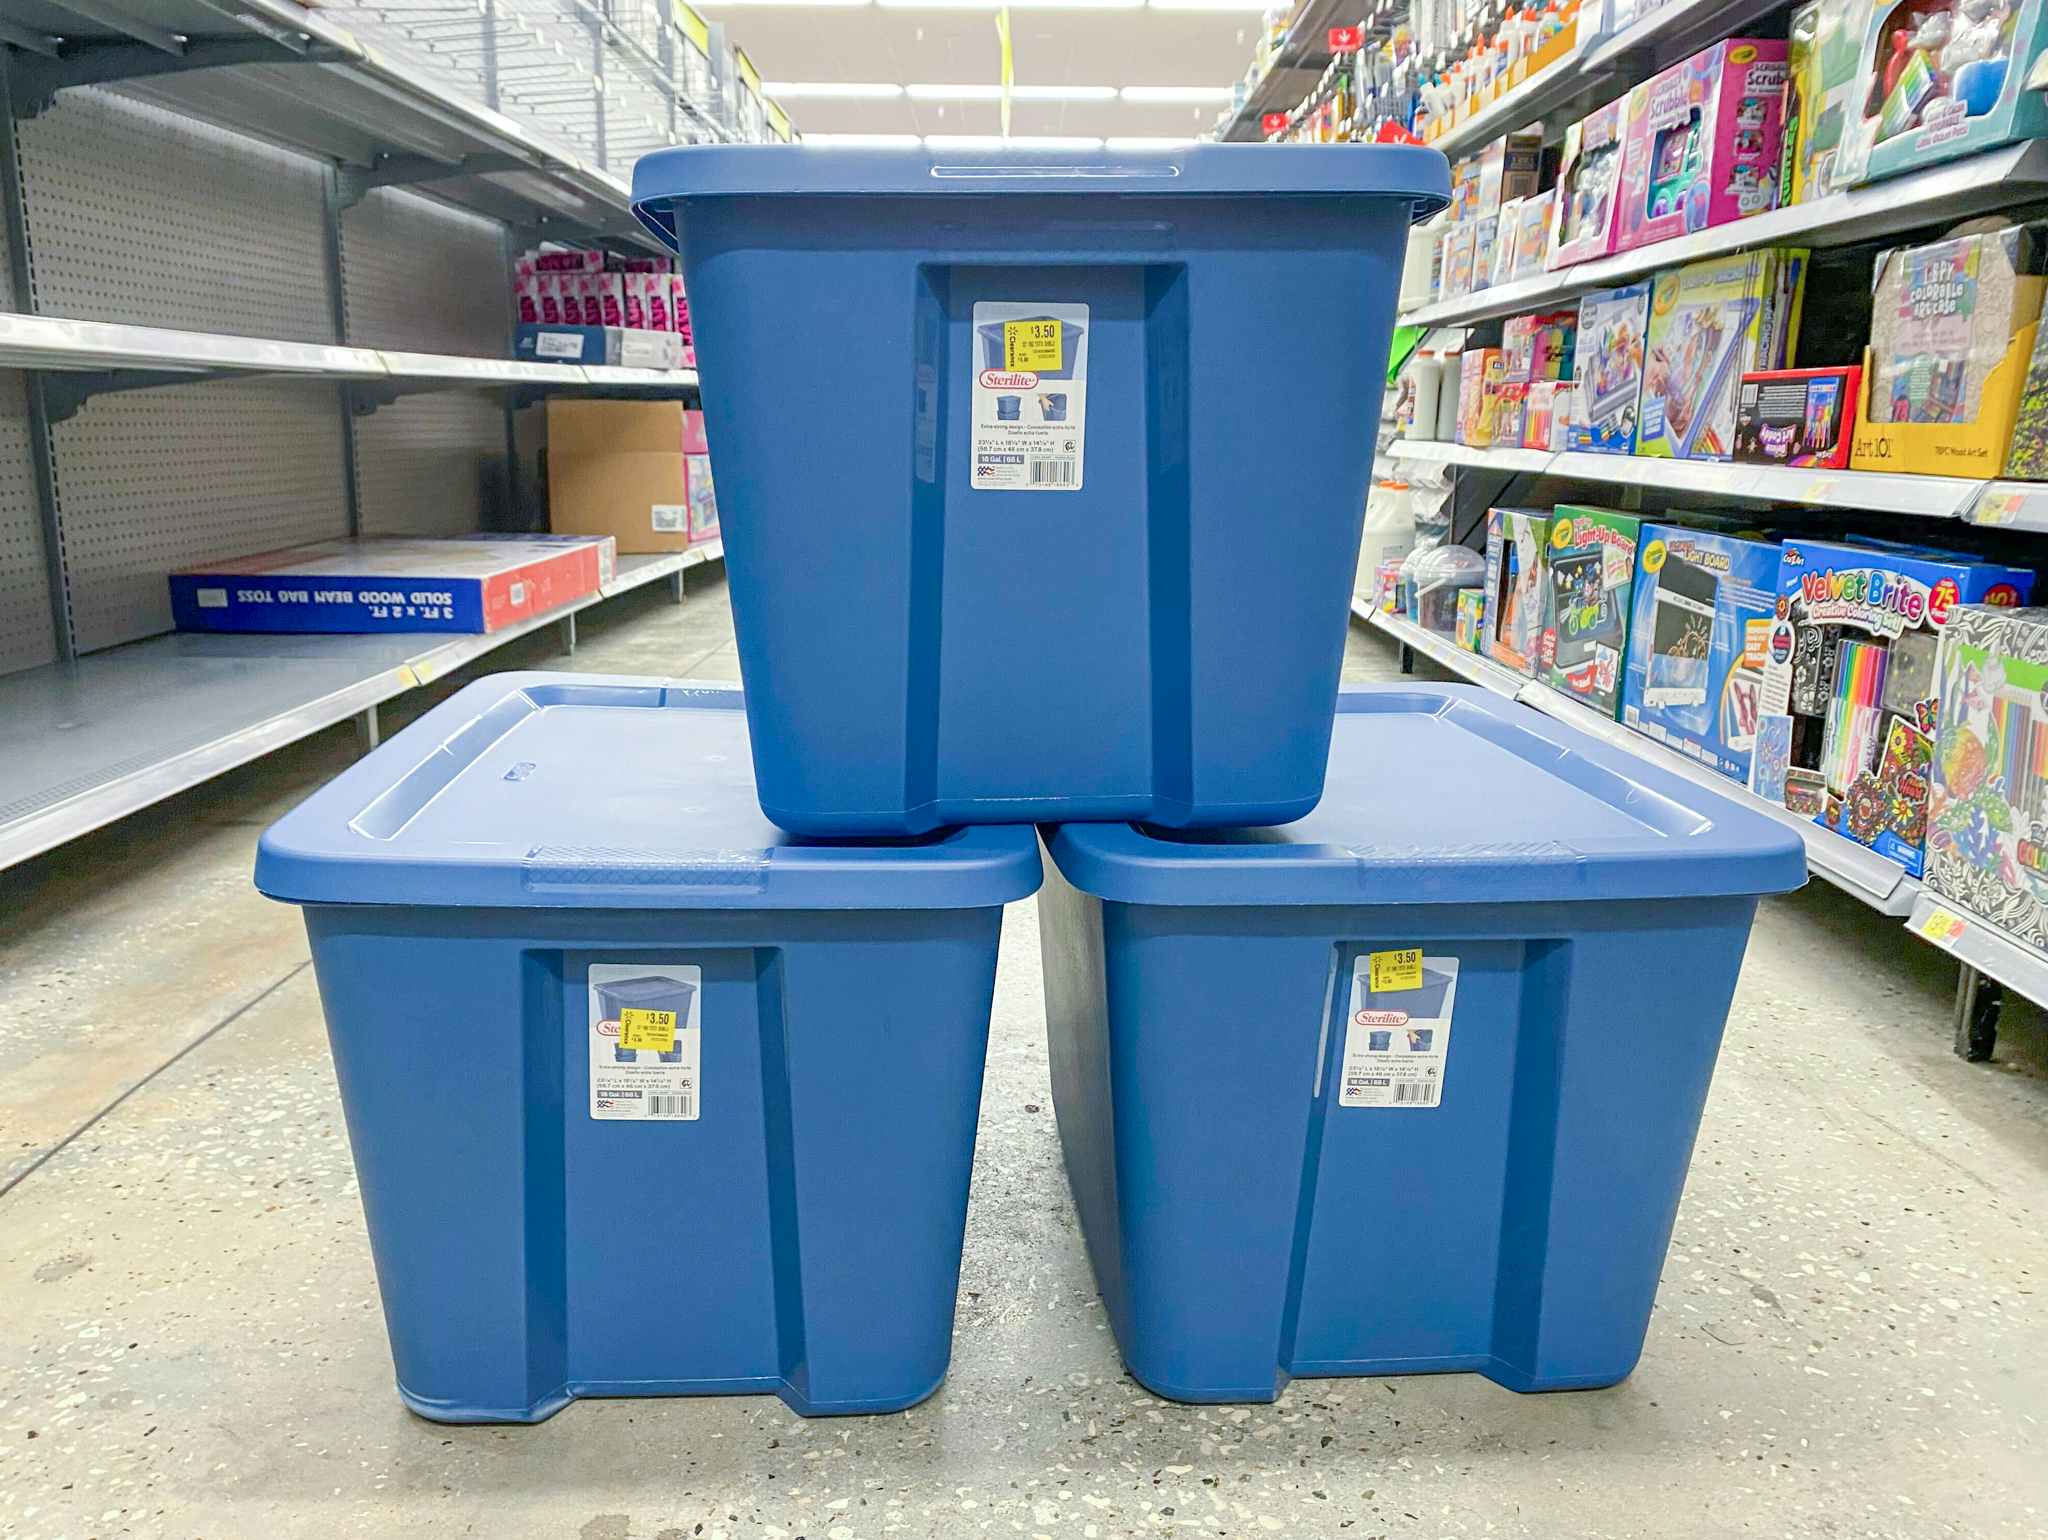 Sterilite 18-Gallon Storage Totes on Clearance — Only $3.50 at Walmart